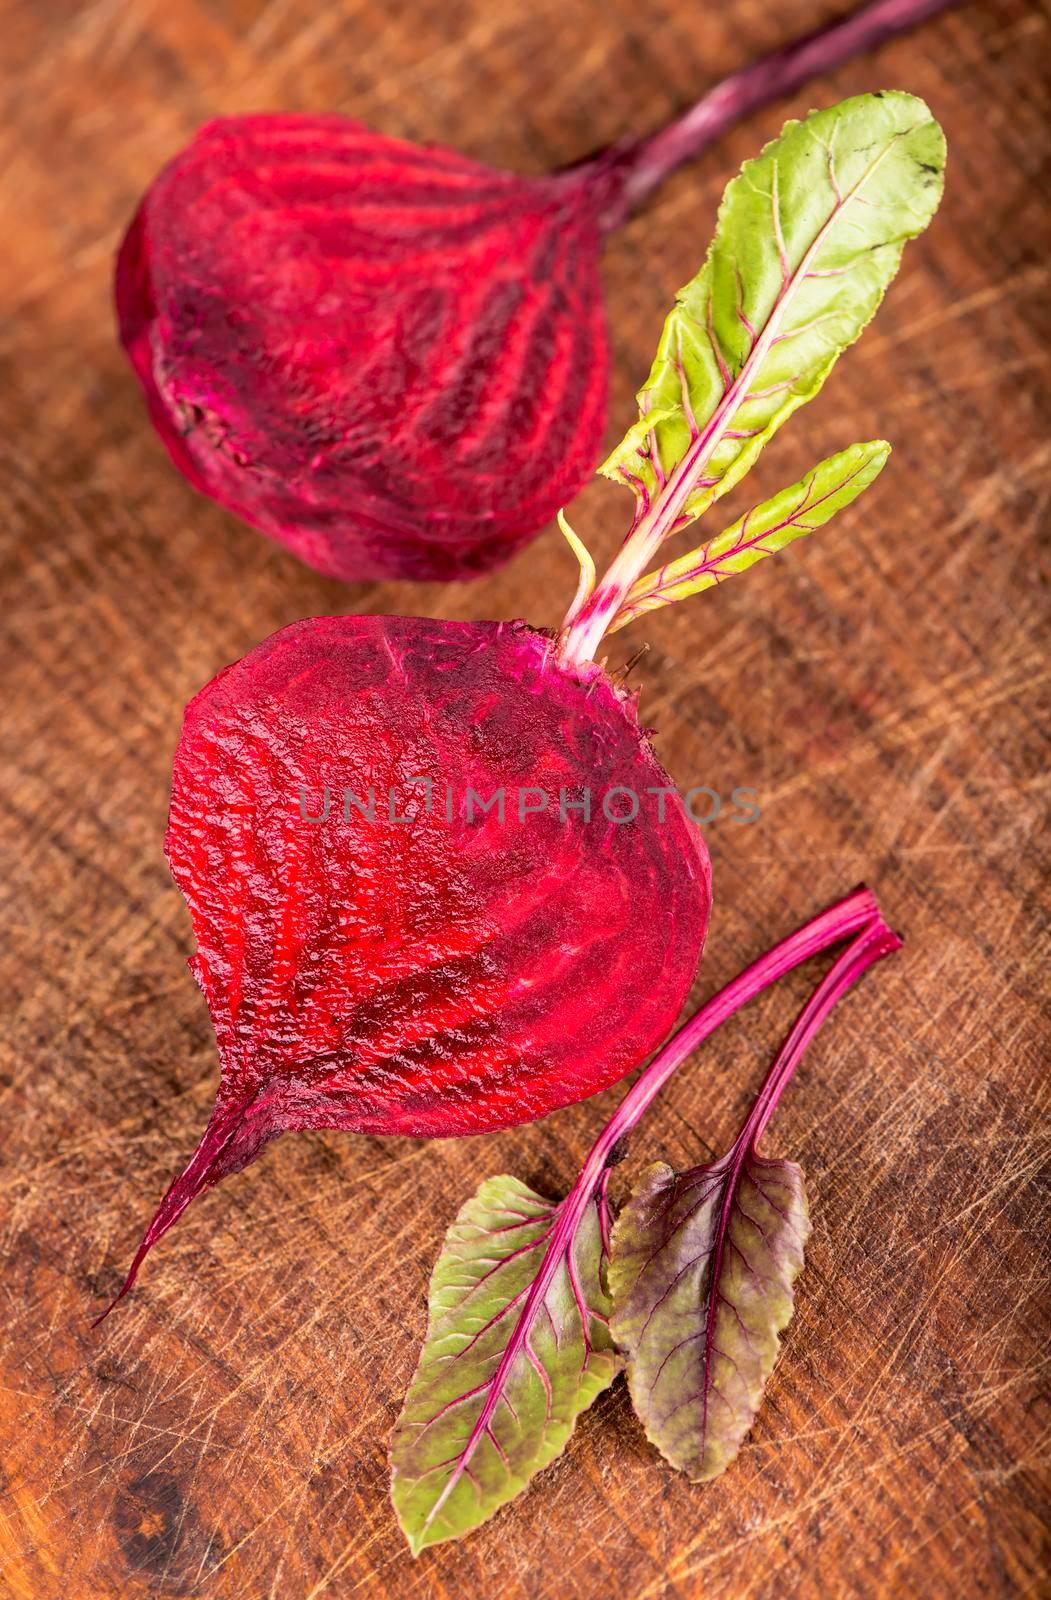 Red beet or beetroot on the wooden table.